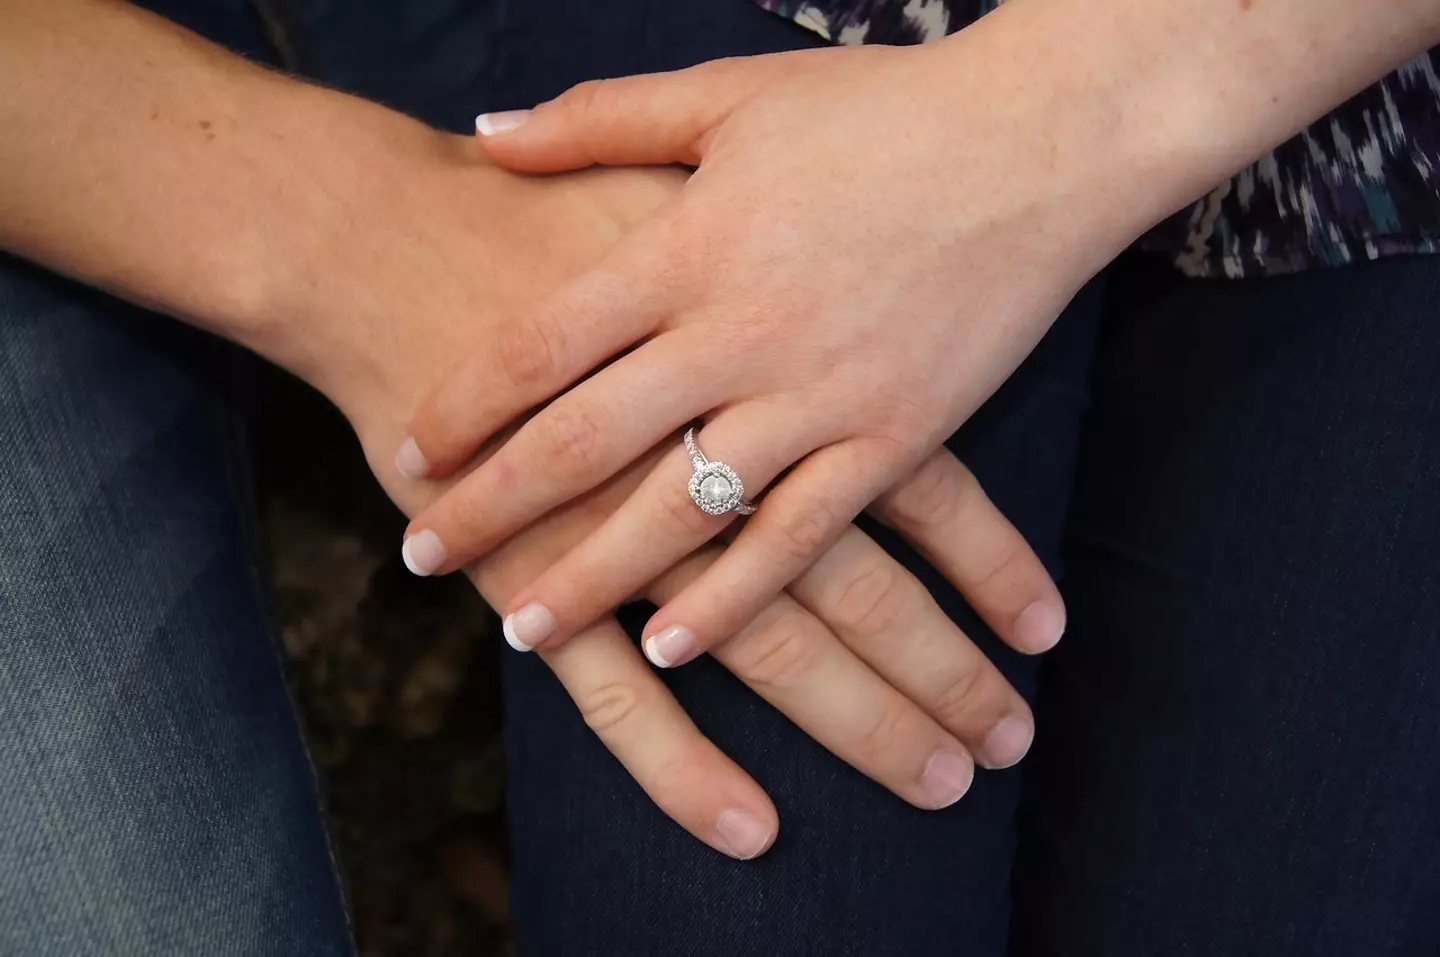 A woman has explained how her late fiancé’s family are demanding she give her engagement ring to his sister.